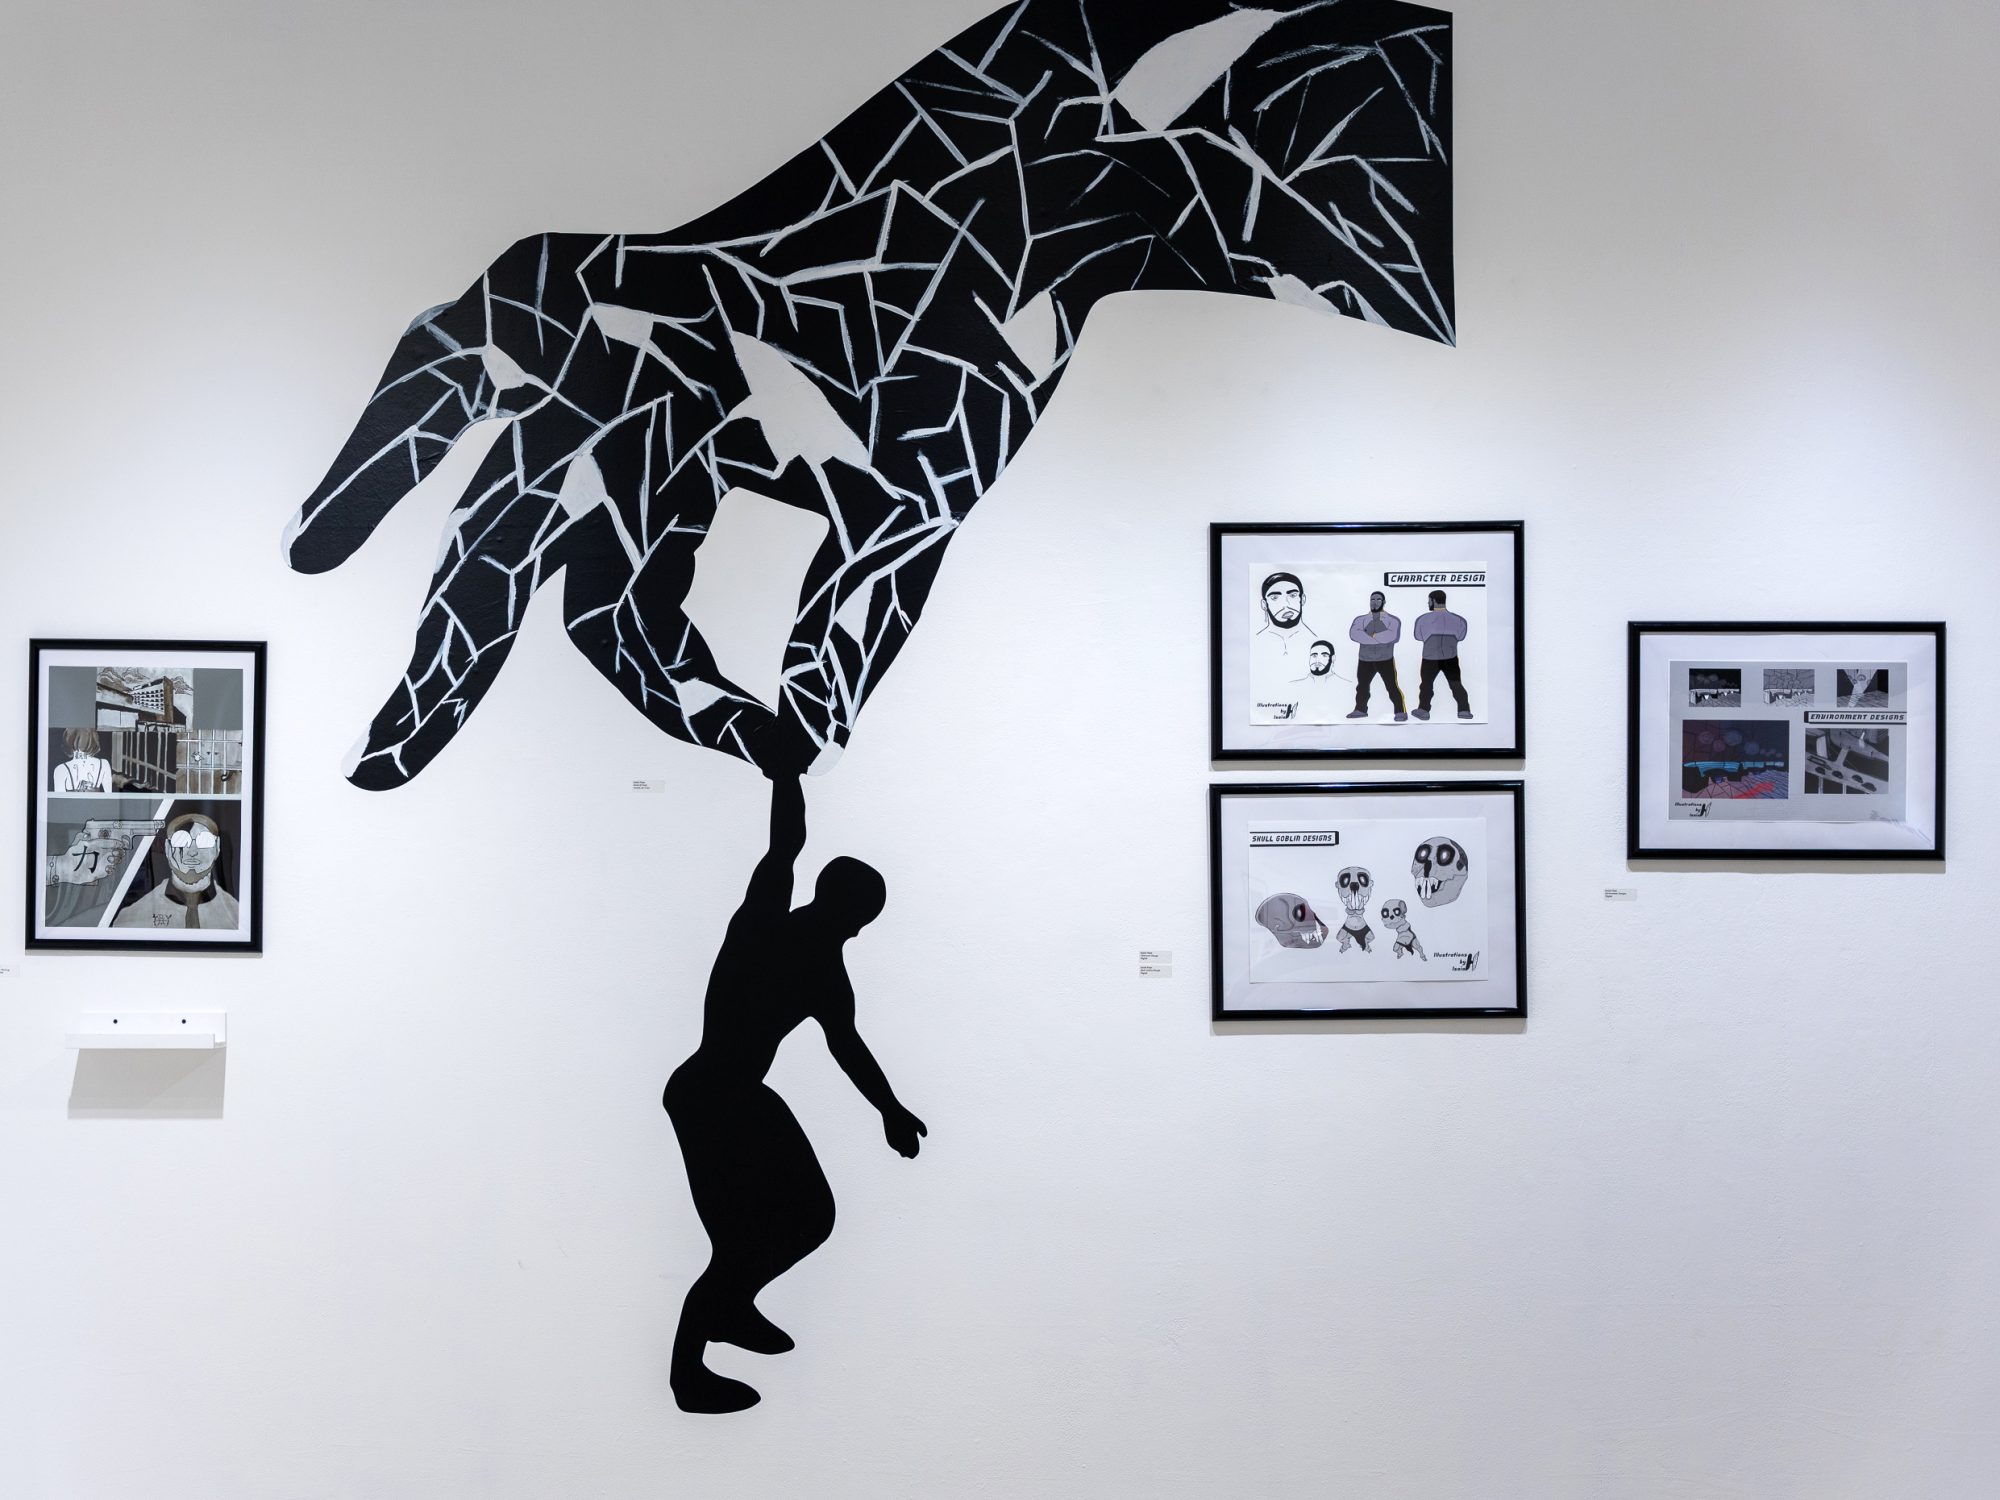 A giant, fragmented hand holding a figure, surrounded by framed comics and concept art